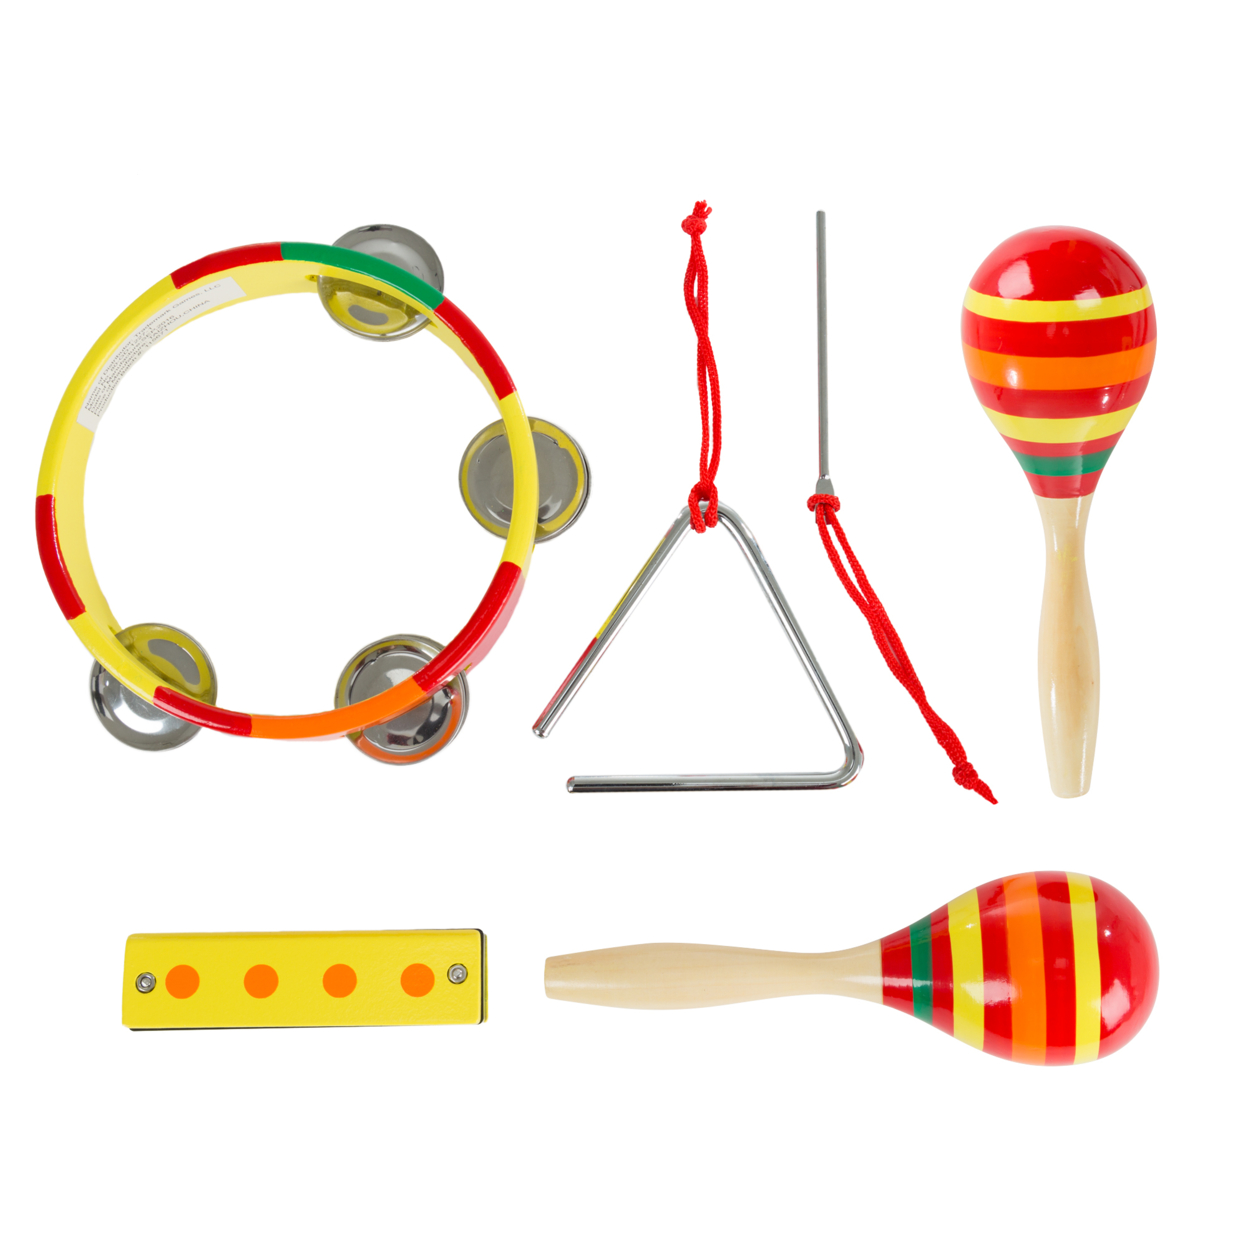 Kids Percussion Musical Instruments Toy Set Maracas Harmonica Triangle